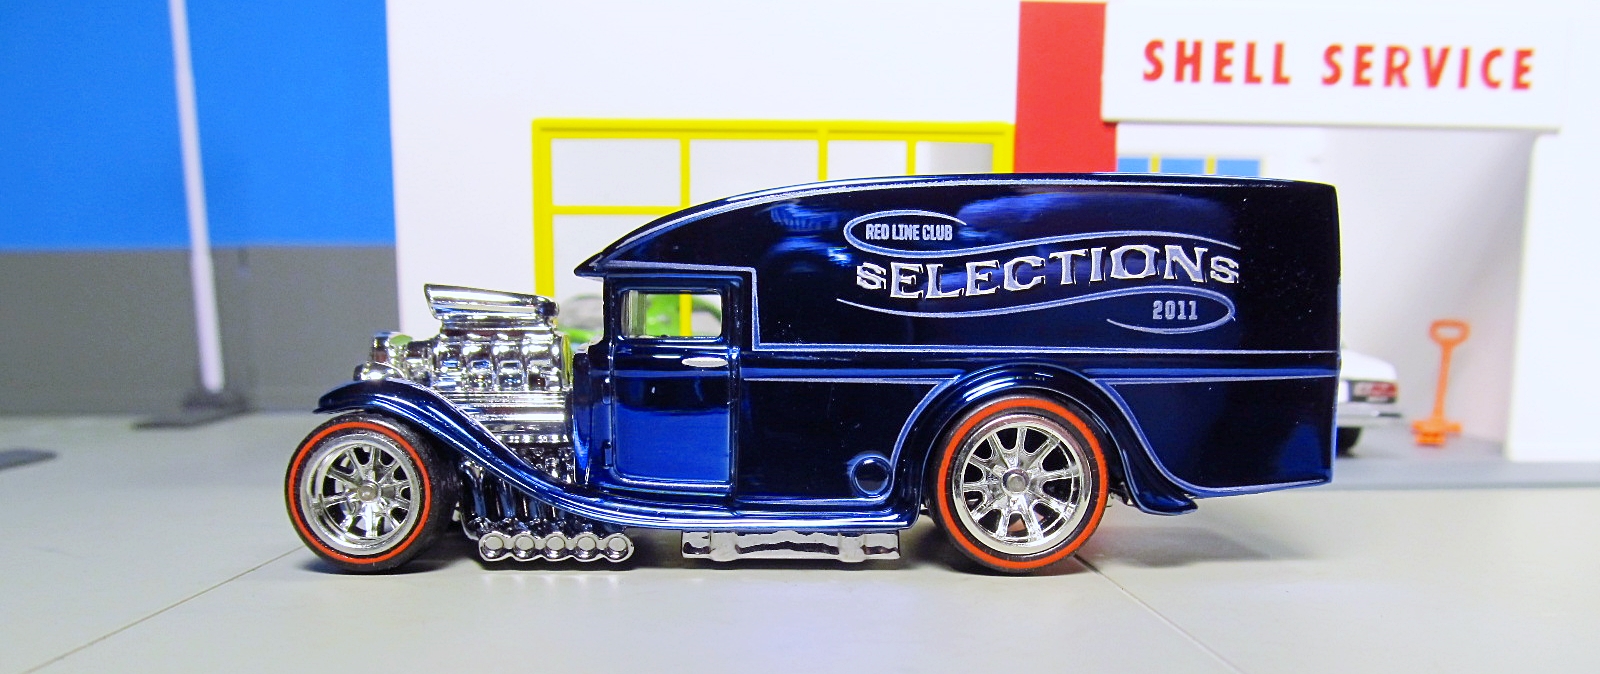 Hot Wheels Rlc 2011 Selections Blown Delivery